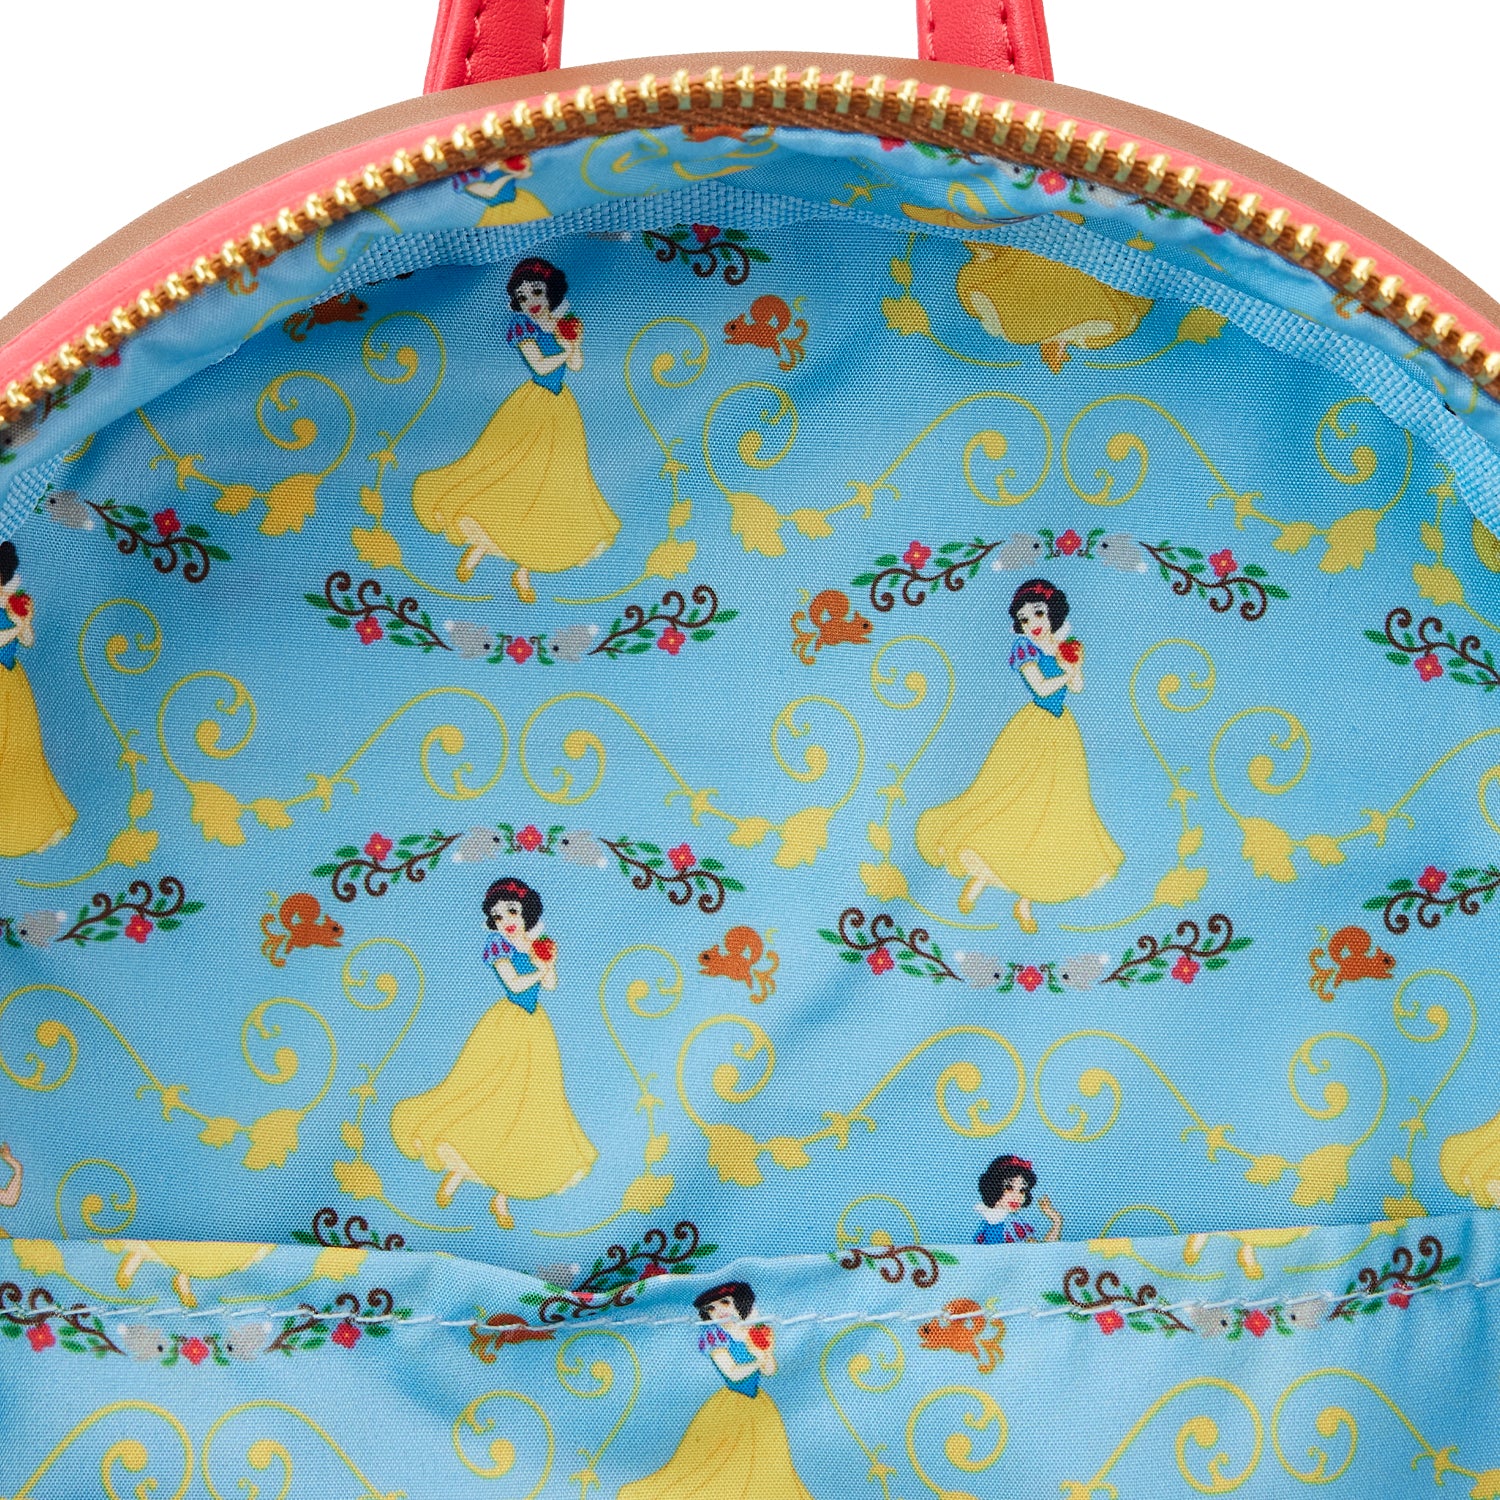 Exclusive Stained Glass Snow White Mini Backpack Loungefly *Final Sale*